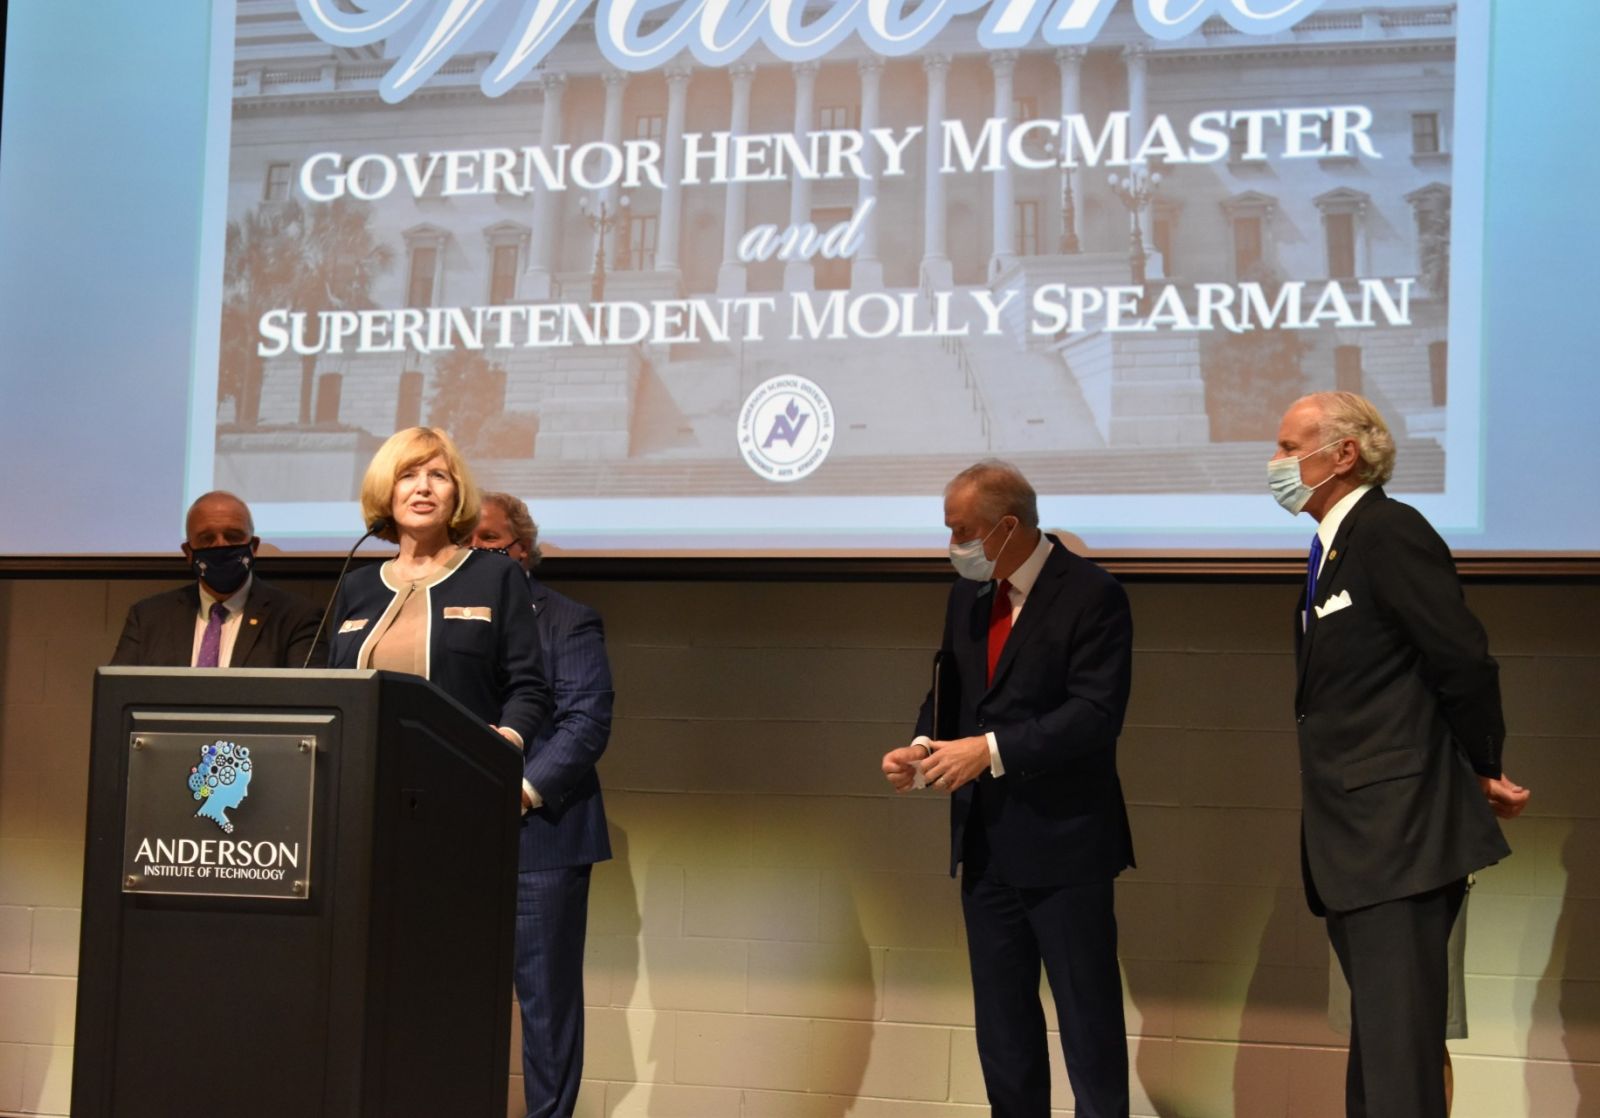 Gov. Henry McMaster looks on as S.C. School Superintendent Molly Spearman gives a speech on PPE distributed to school districts. (Photo/Molly Hulsey)